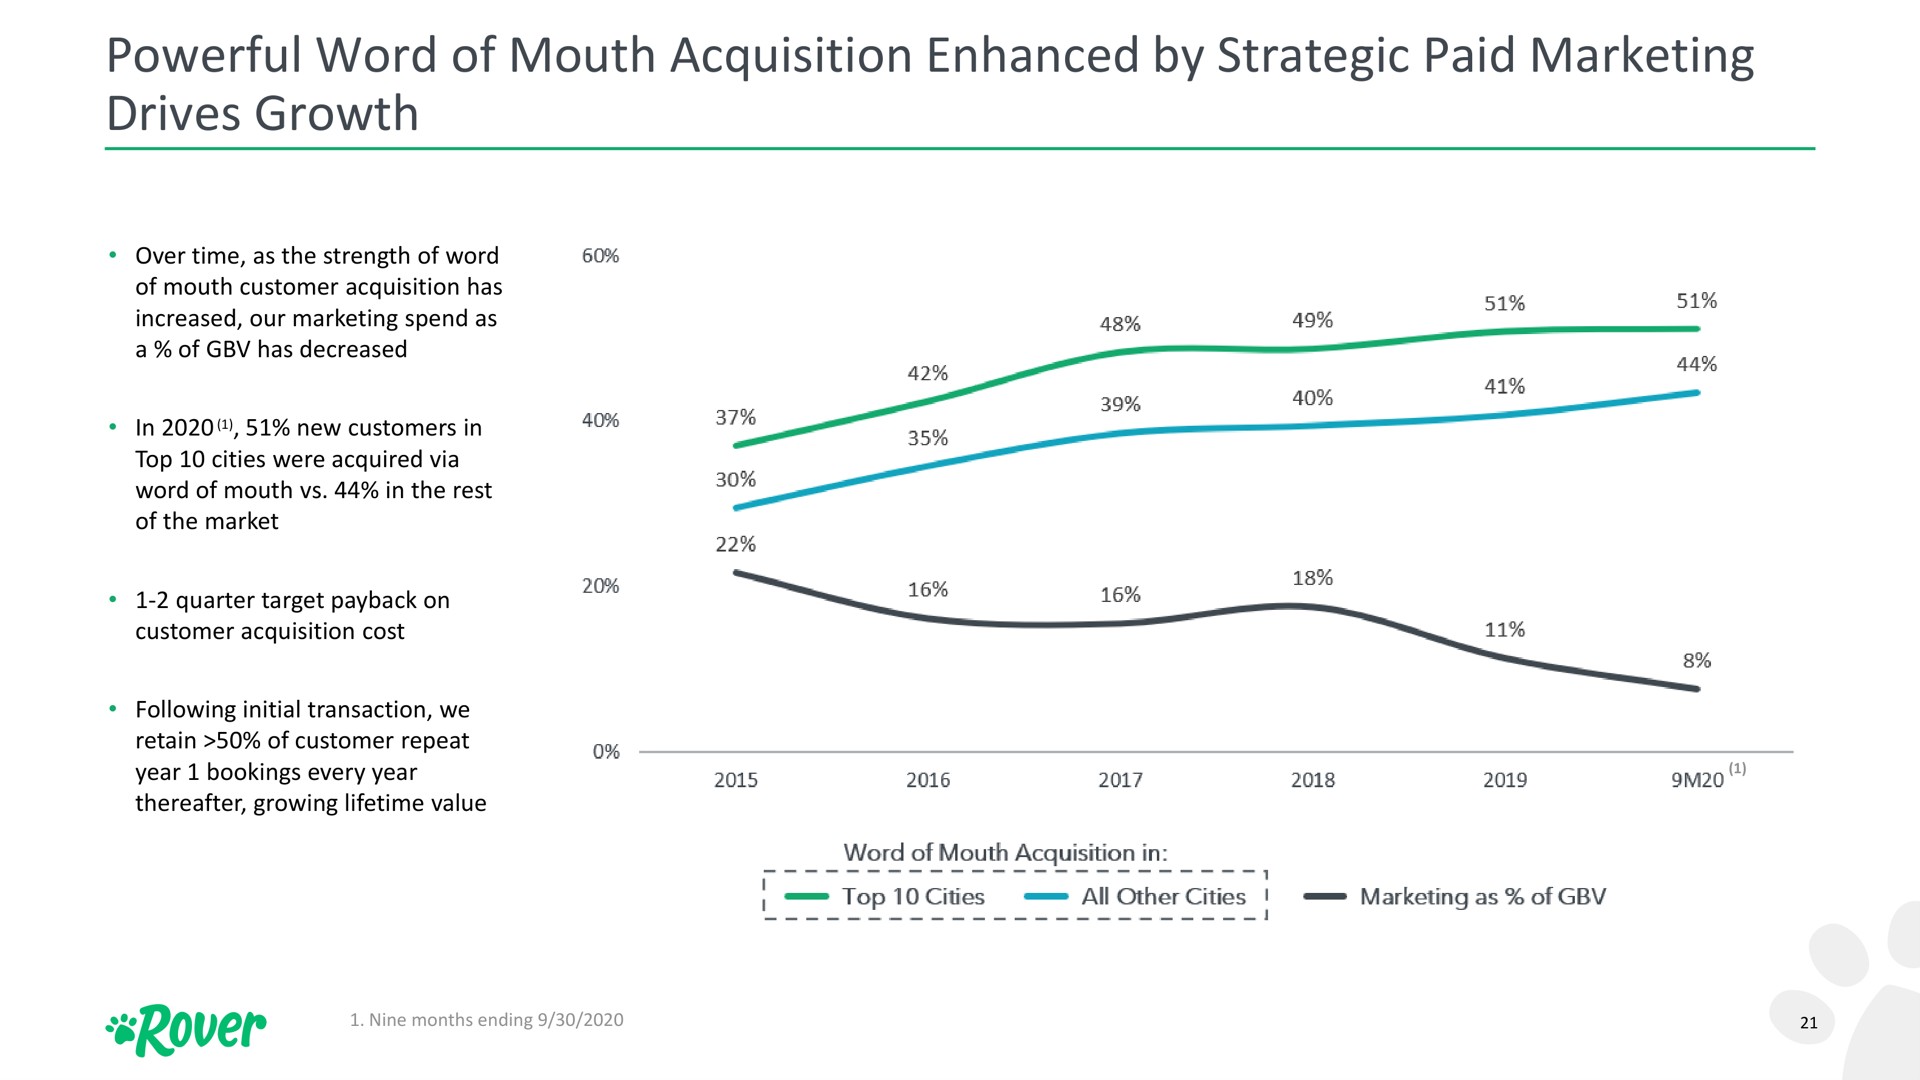 powerful word of mouth acquisition enhanced by strategic paid marketing drives growth | Rover